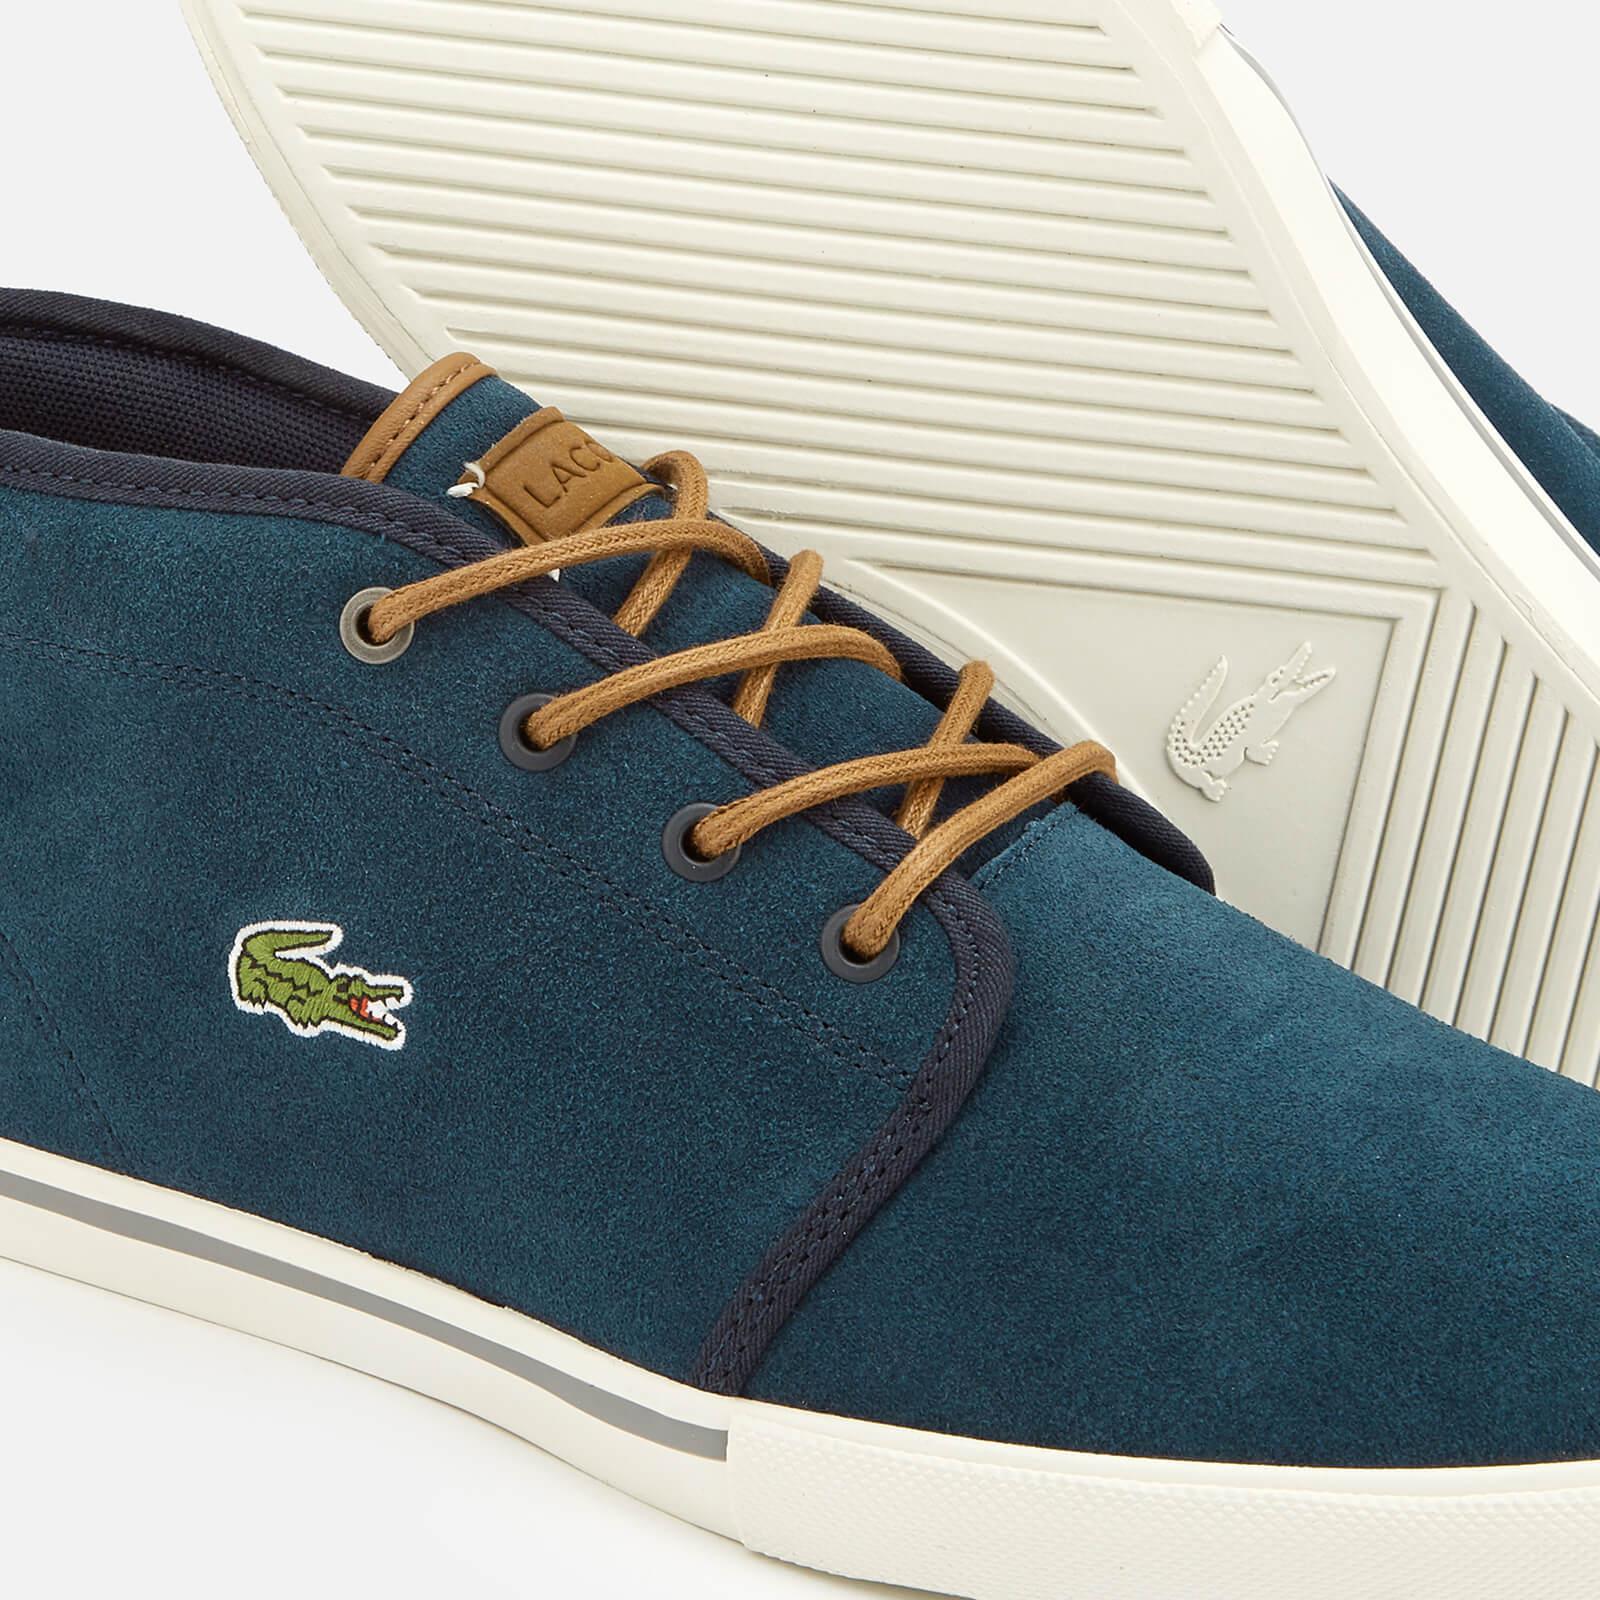 lacoste ampthill 318 1